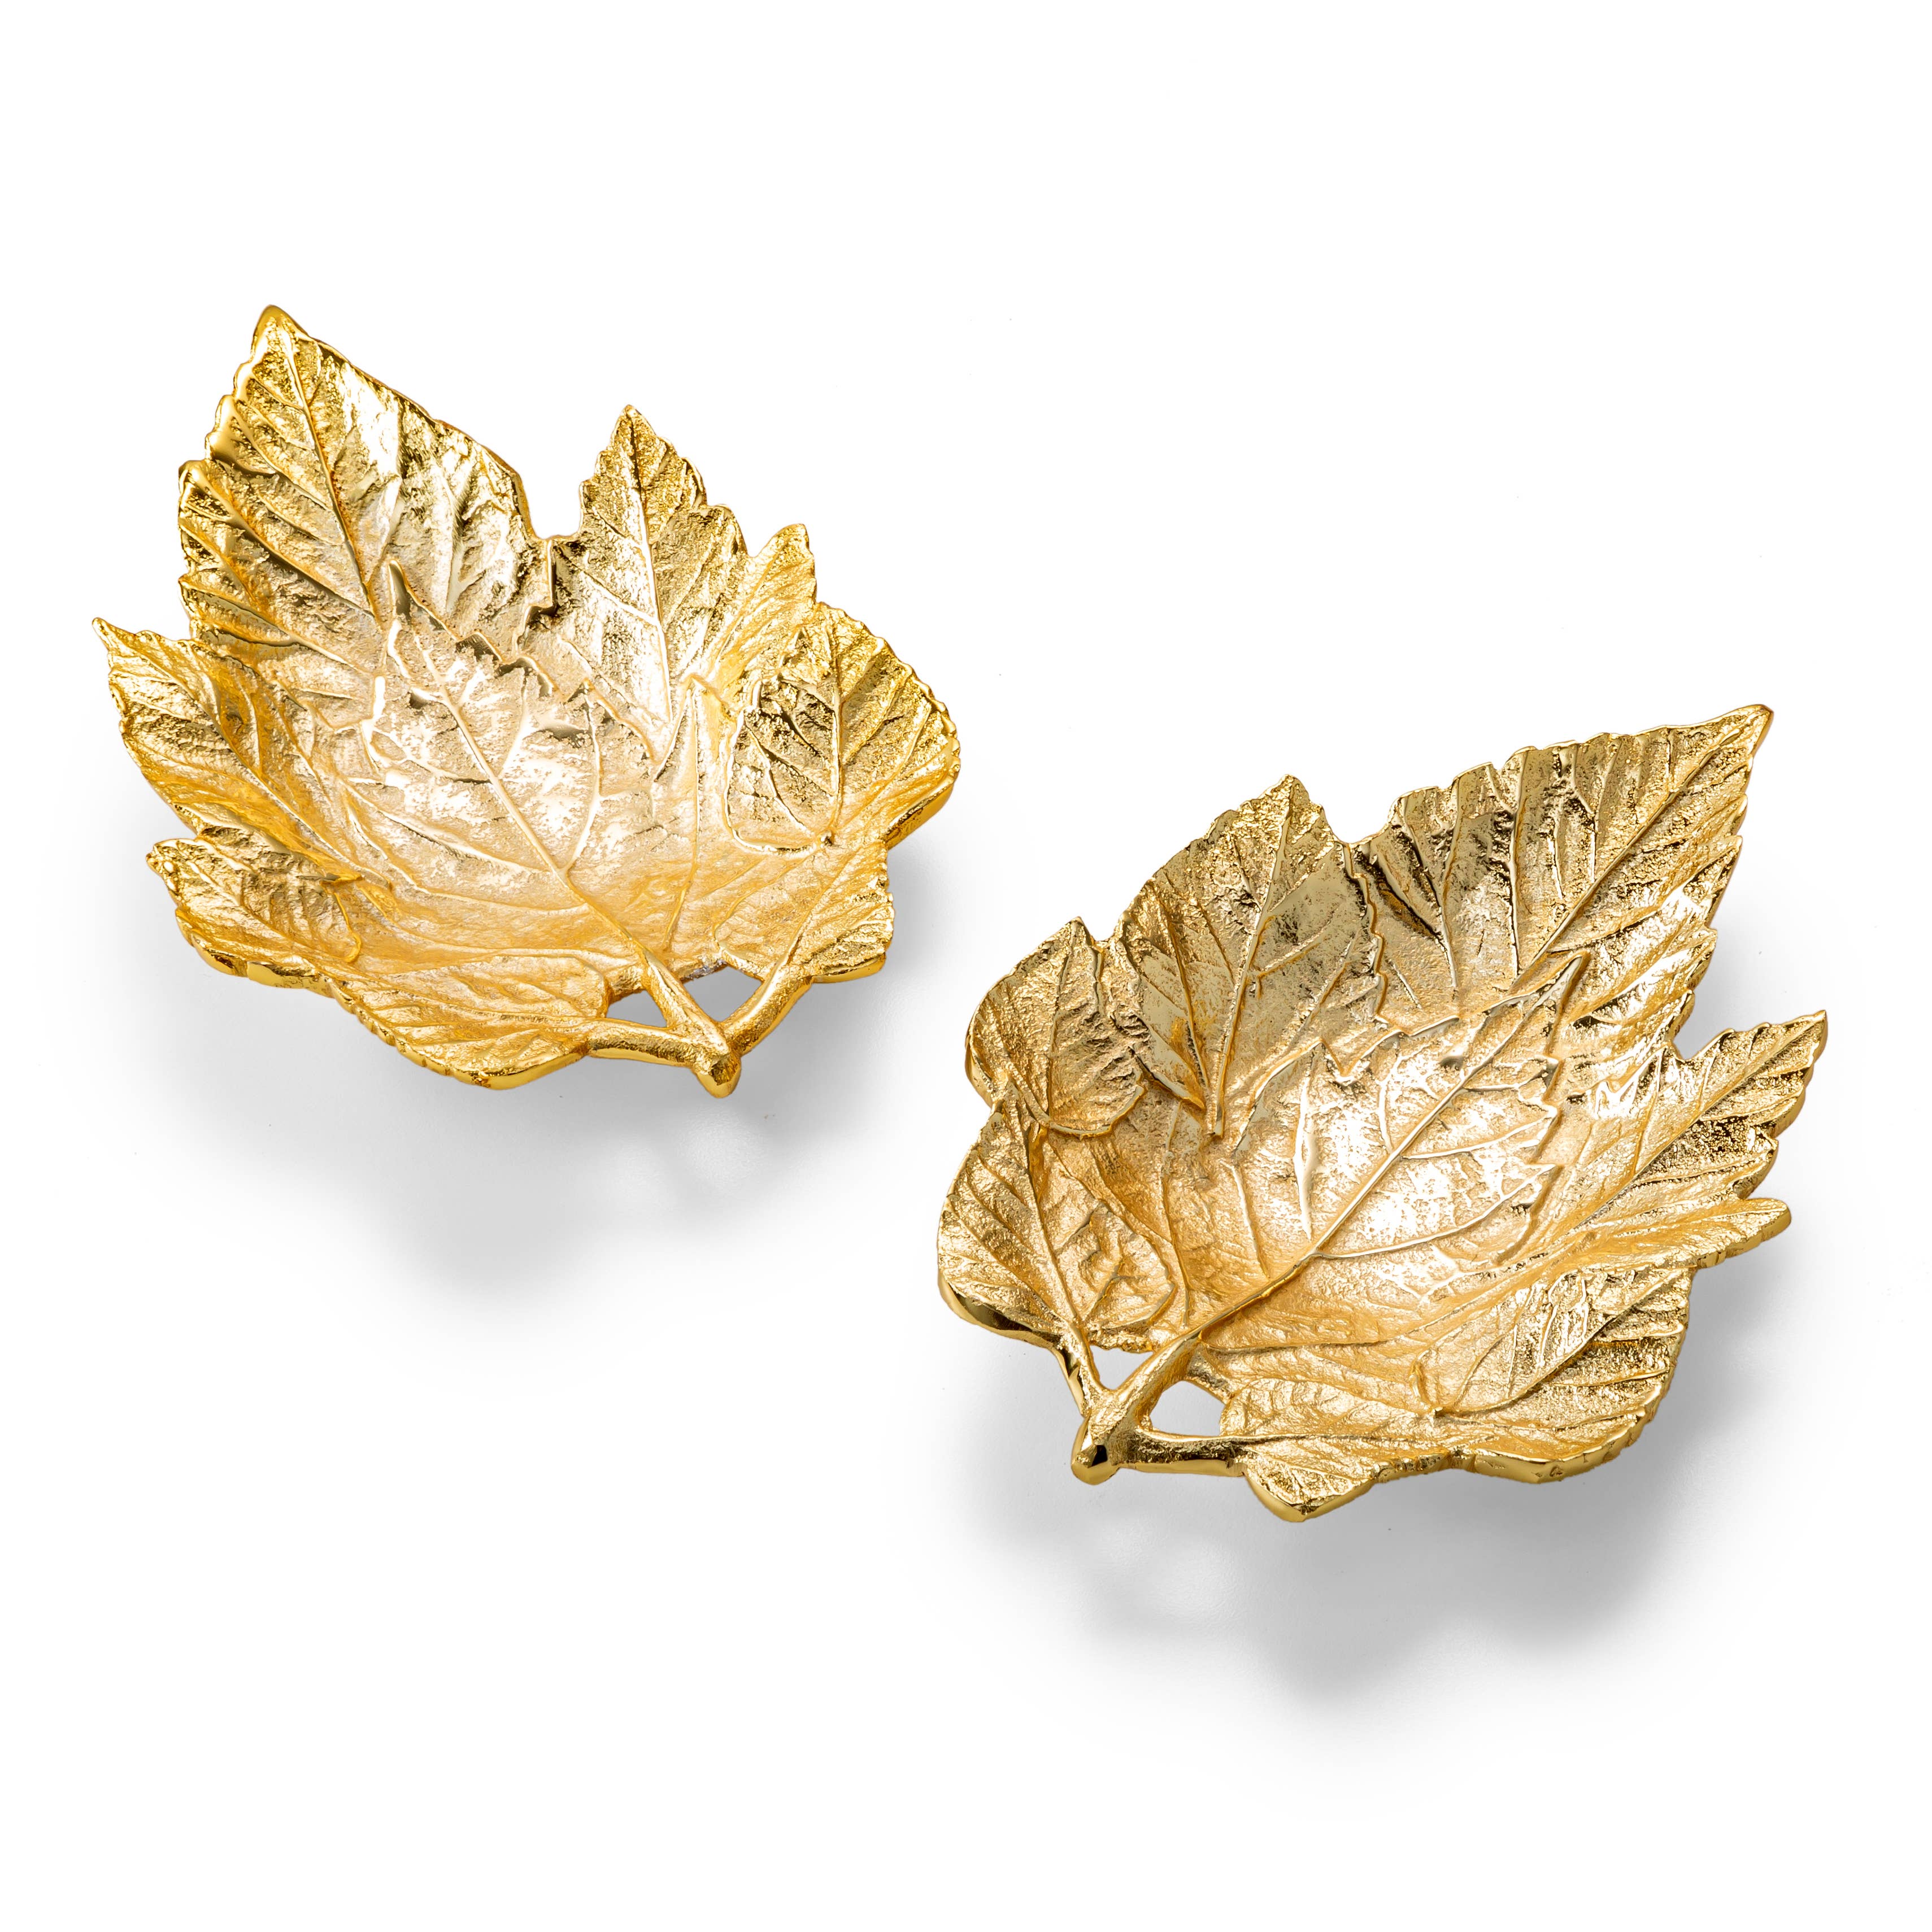 Gold Metal Leaves Dishes (Set of 2) (5610102259869)